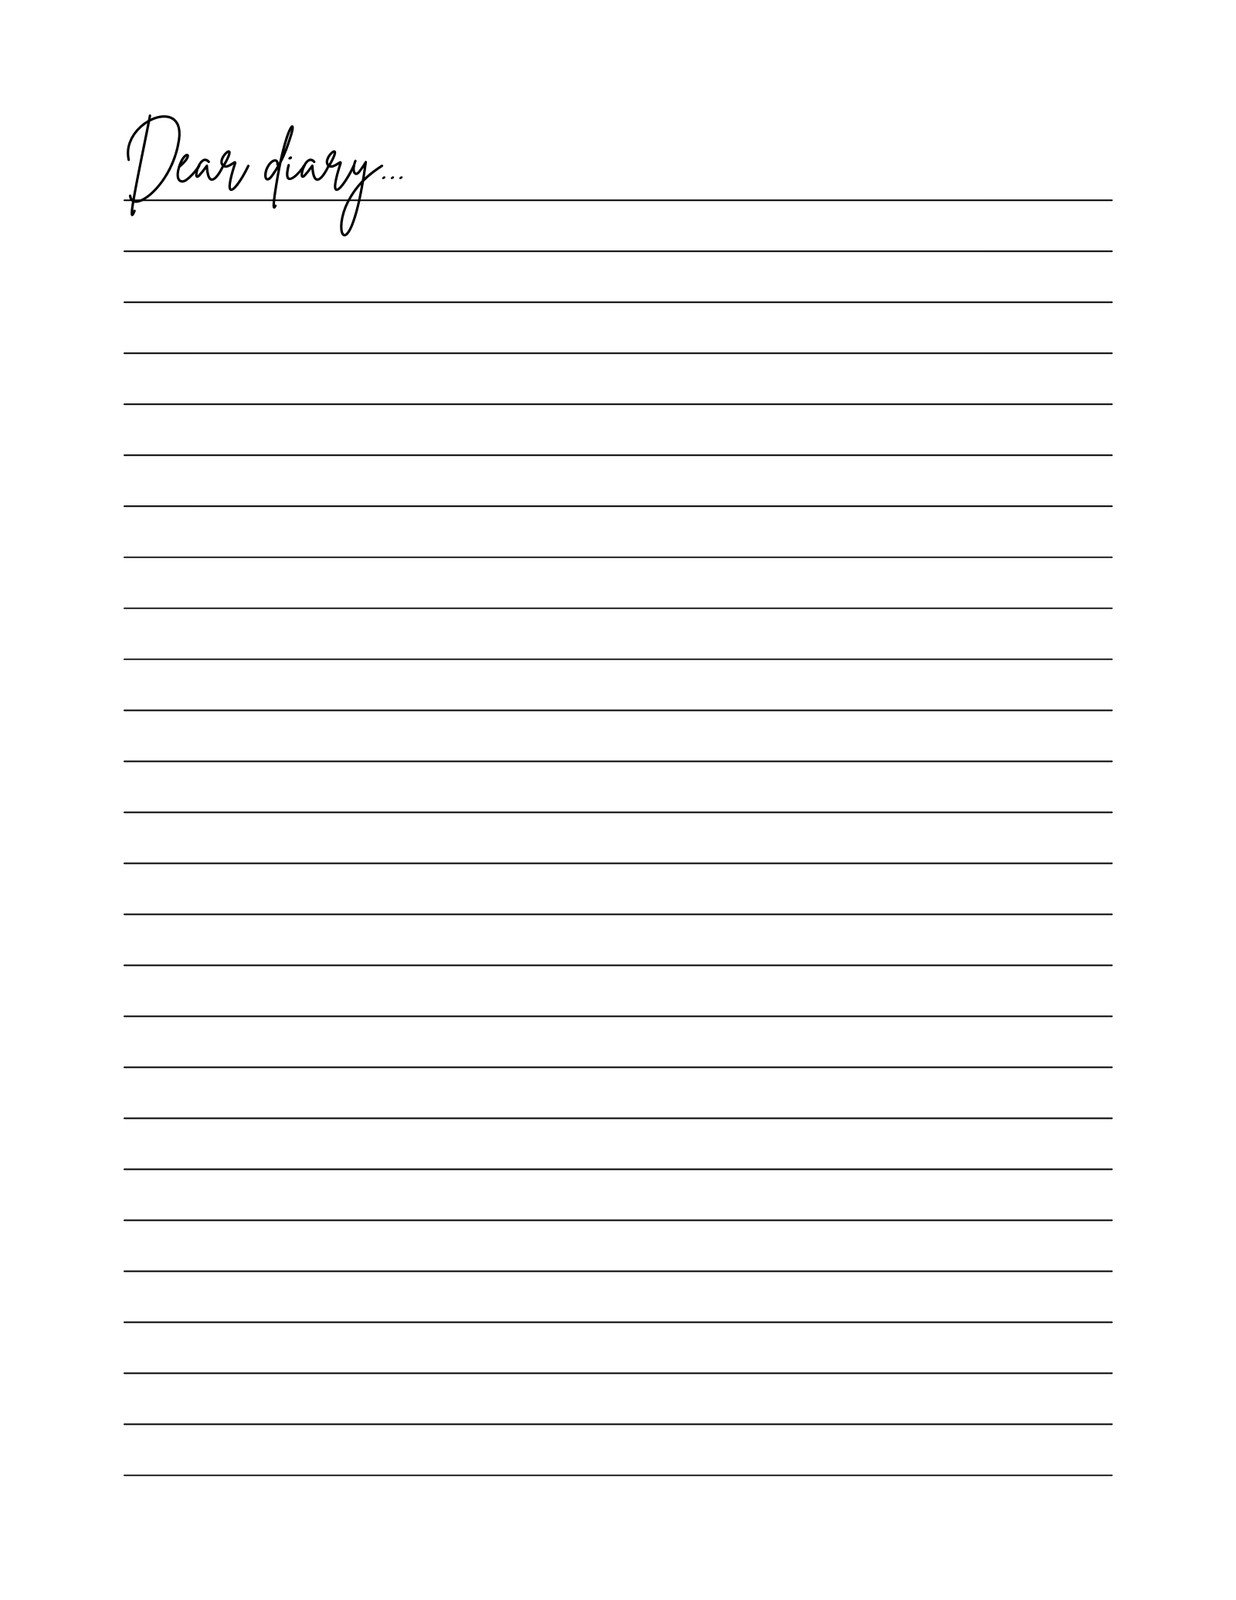 blank diary page with lines